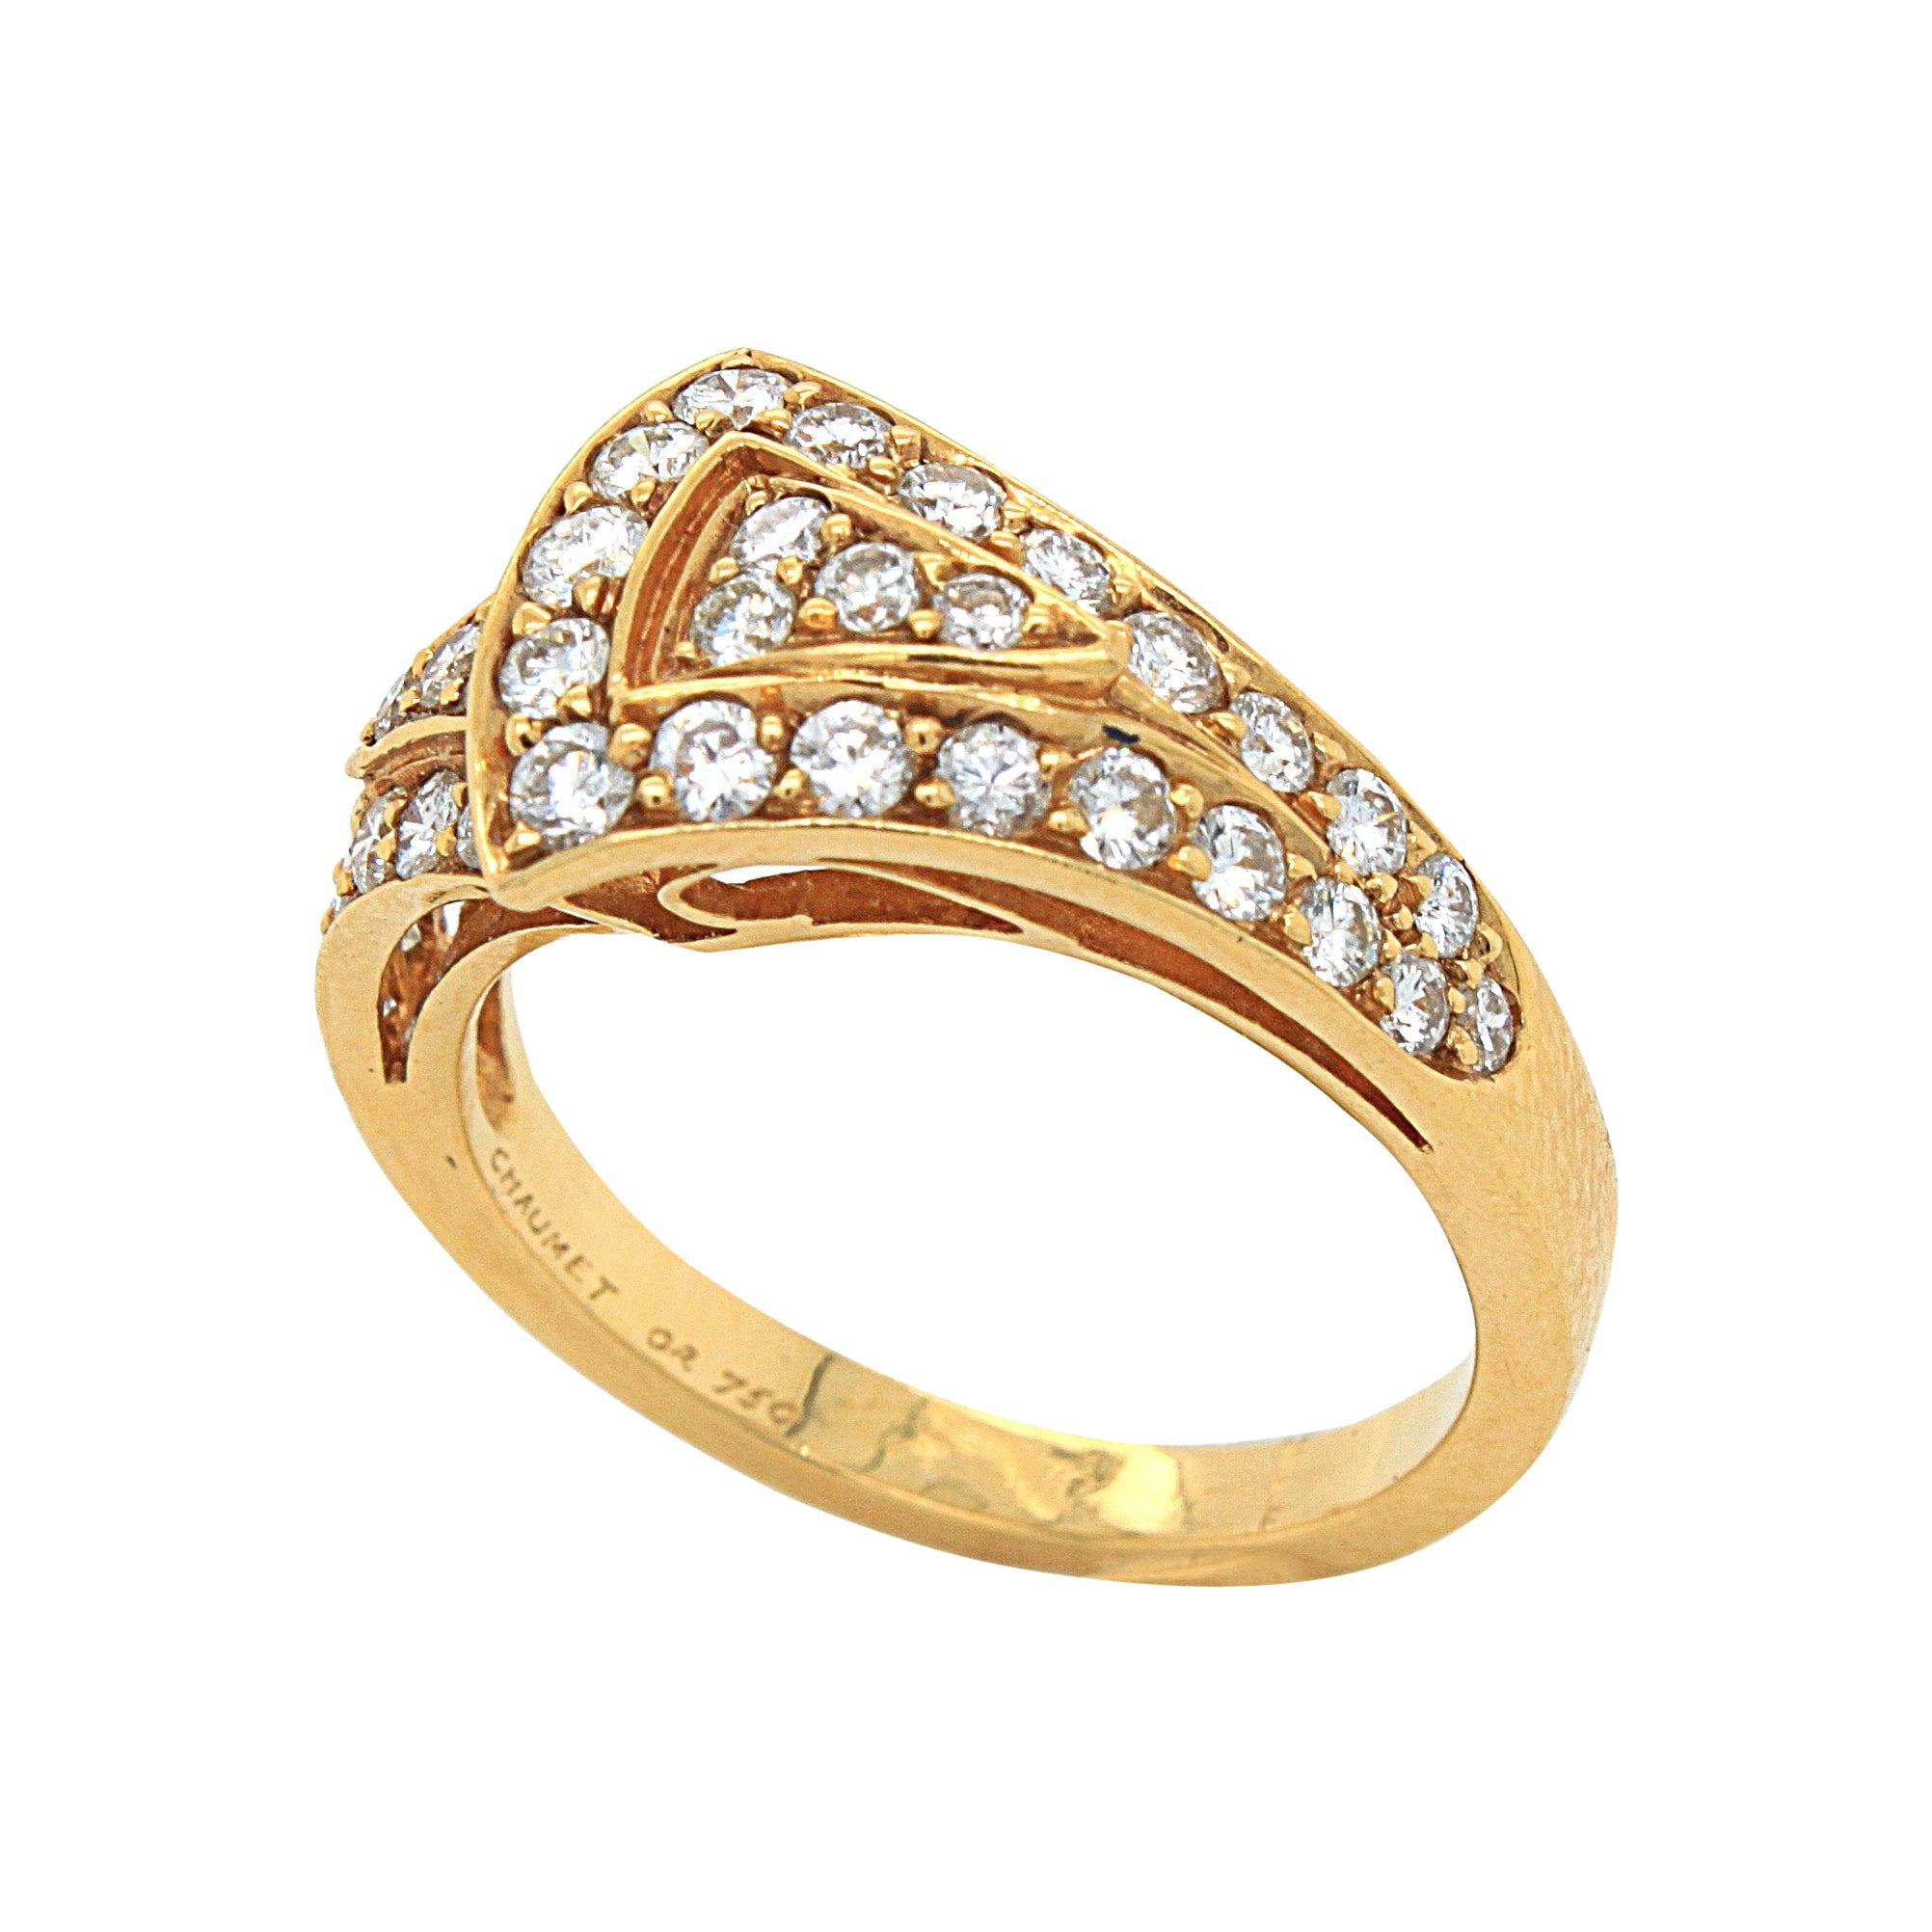 Geometric Diamond Ring in 18k Yellow Gold, by Chaumet, 20th Century